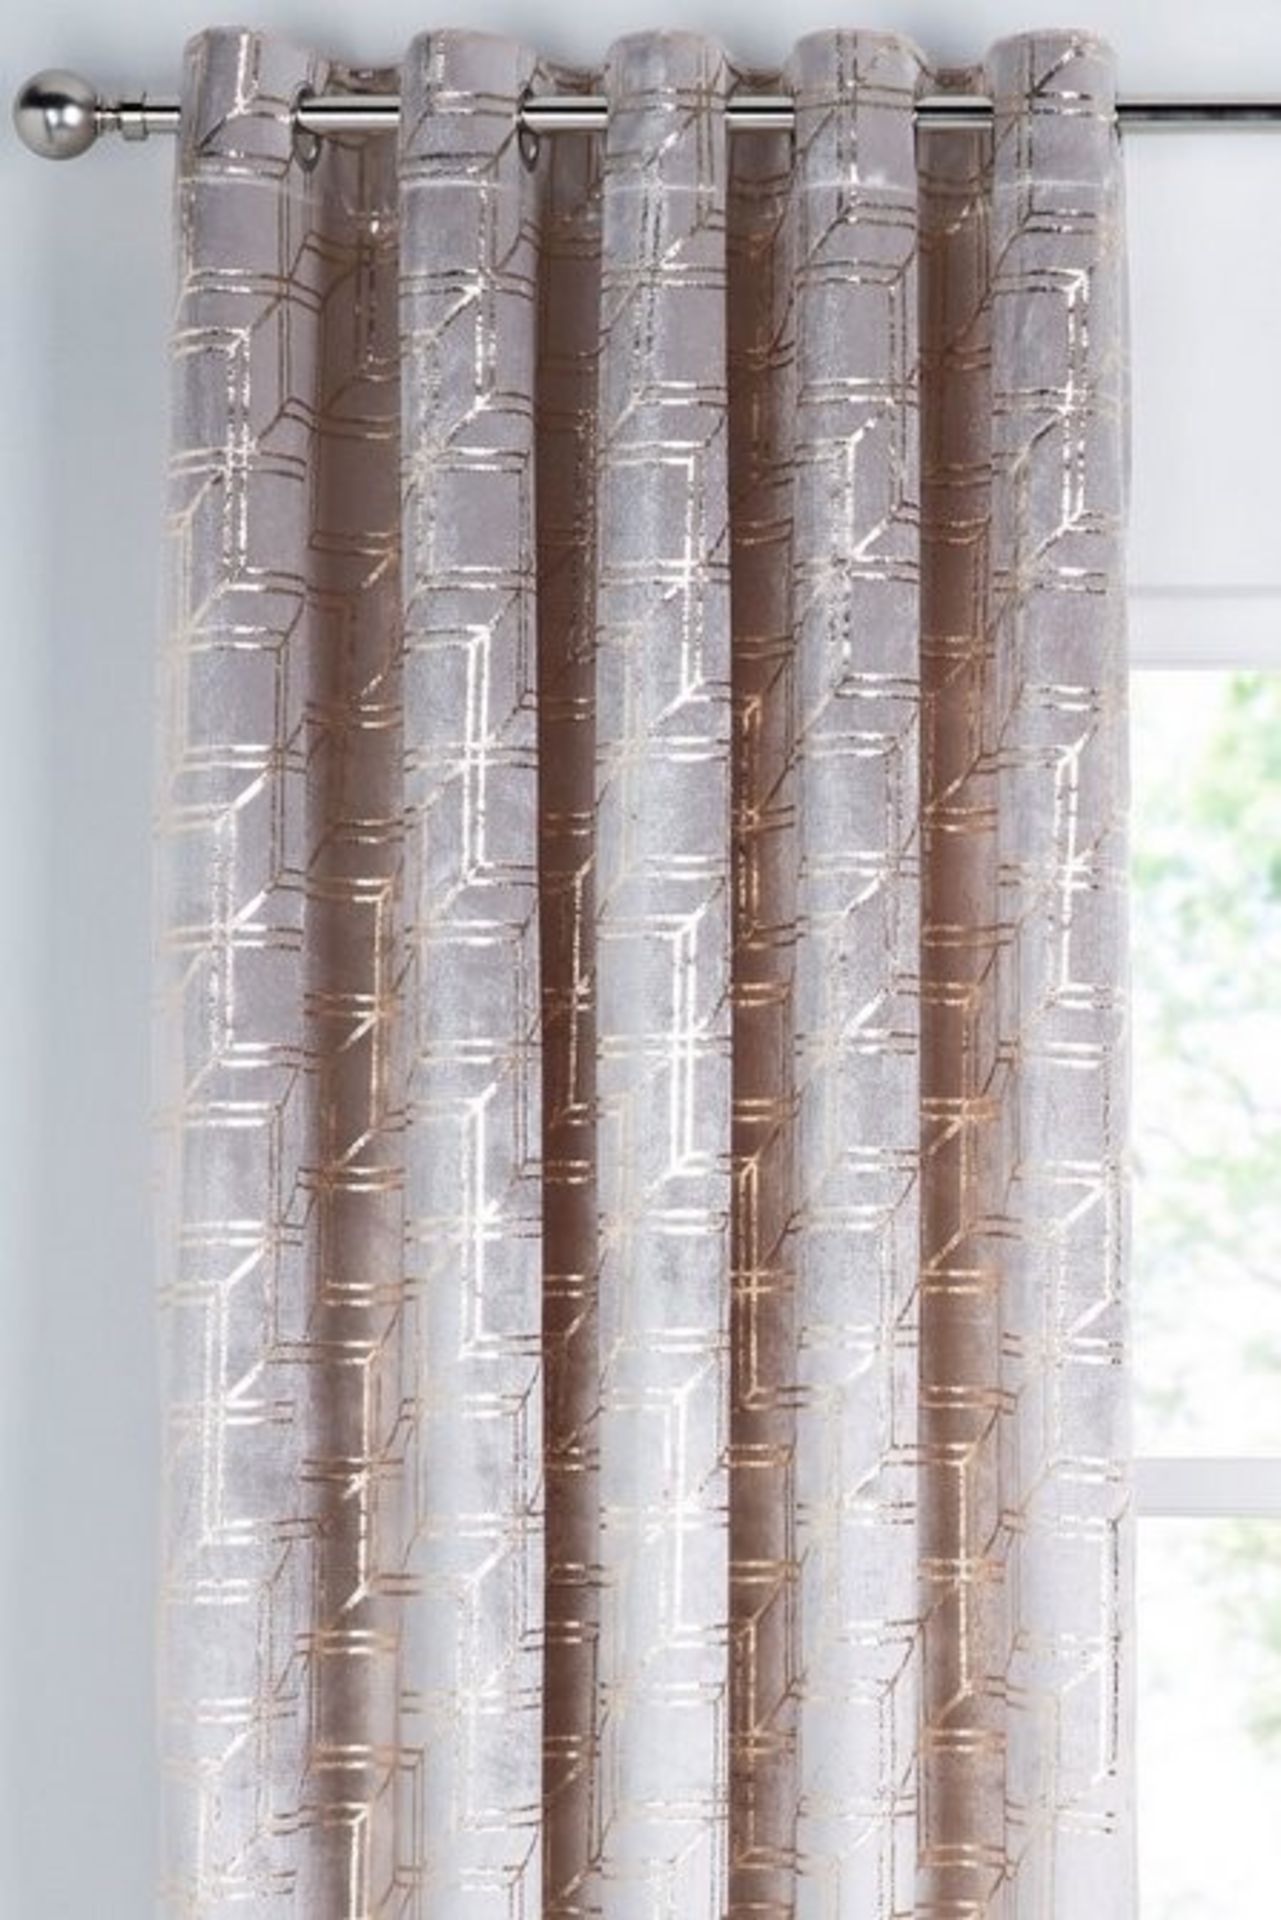 1 BAGGED METALLIC CUBES VELVET EYELES CURTAINS IN NATURAL / 90X90" / RRP £110.00 (PUBLIC VIEWING - Image 2 of 2